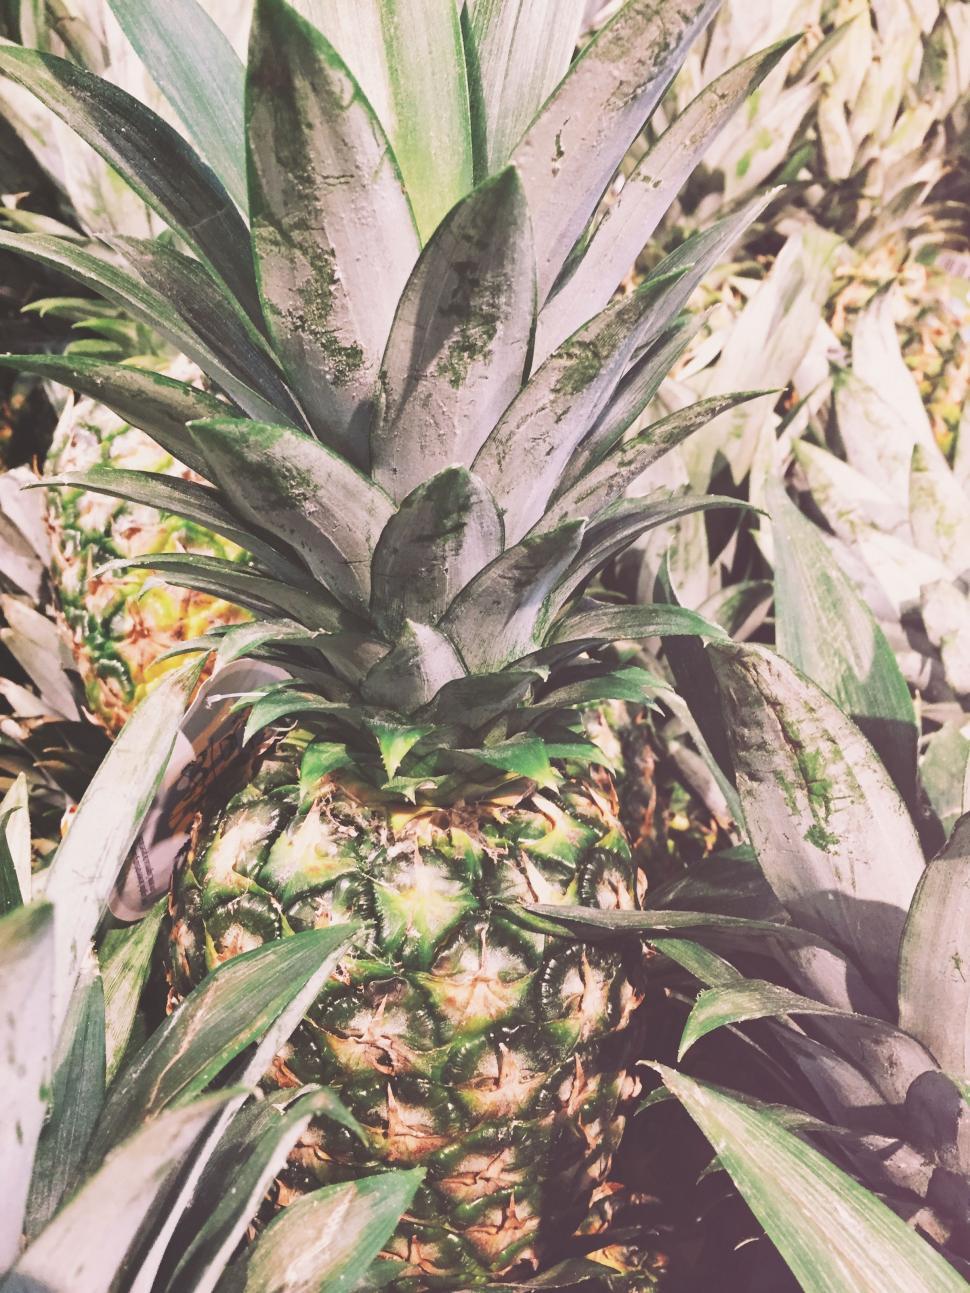 Free Image of Pineapple with green leaves 